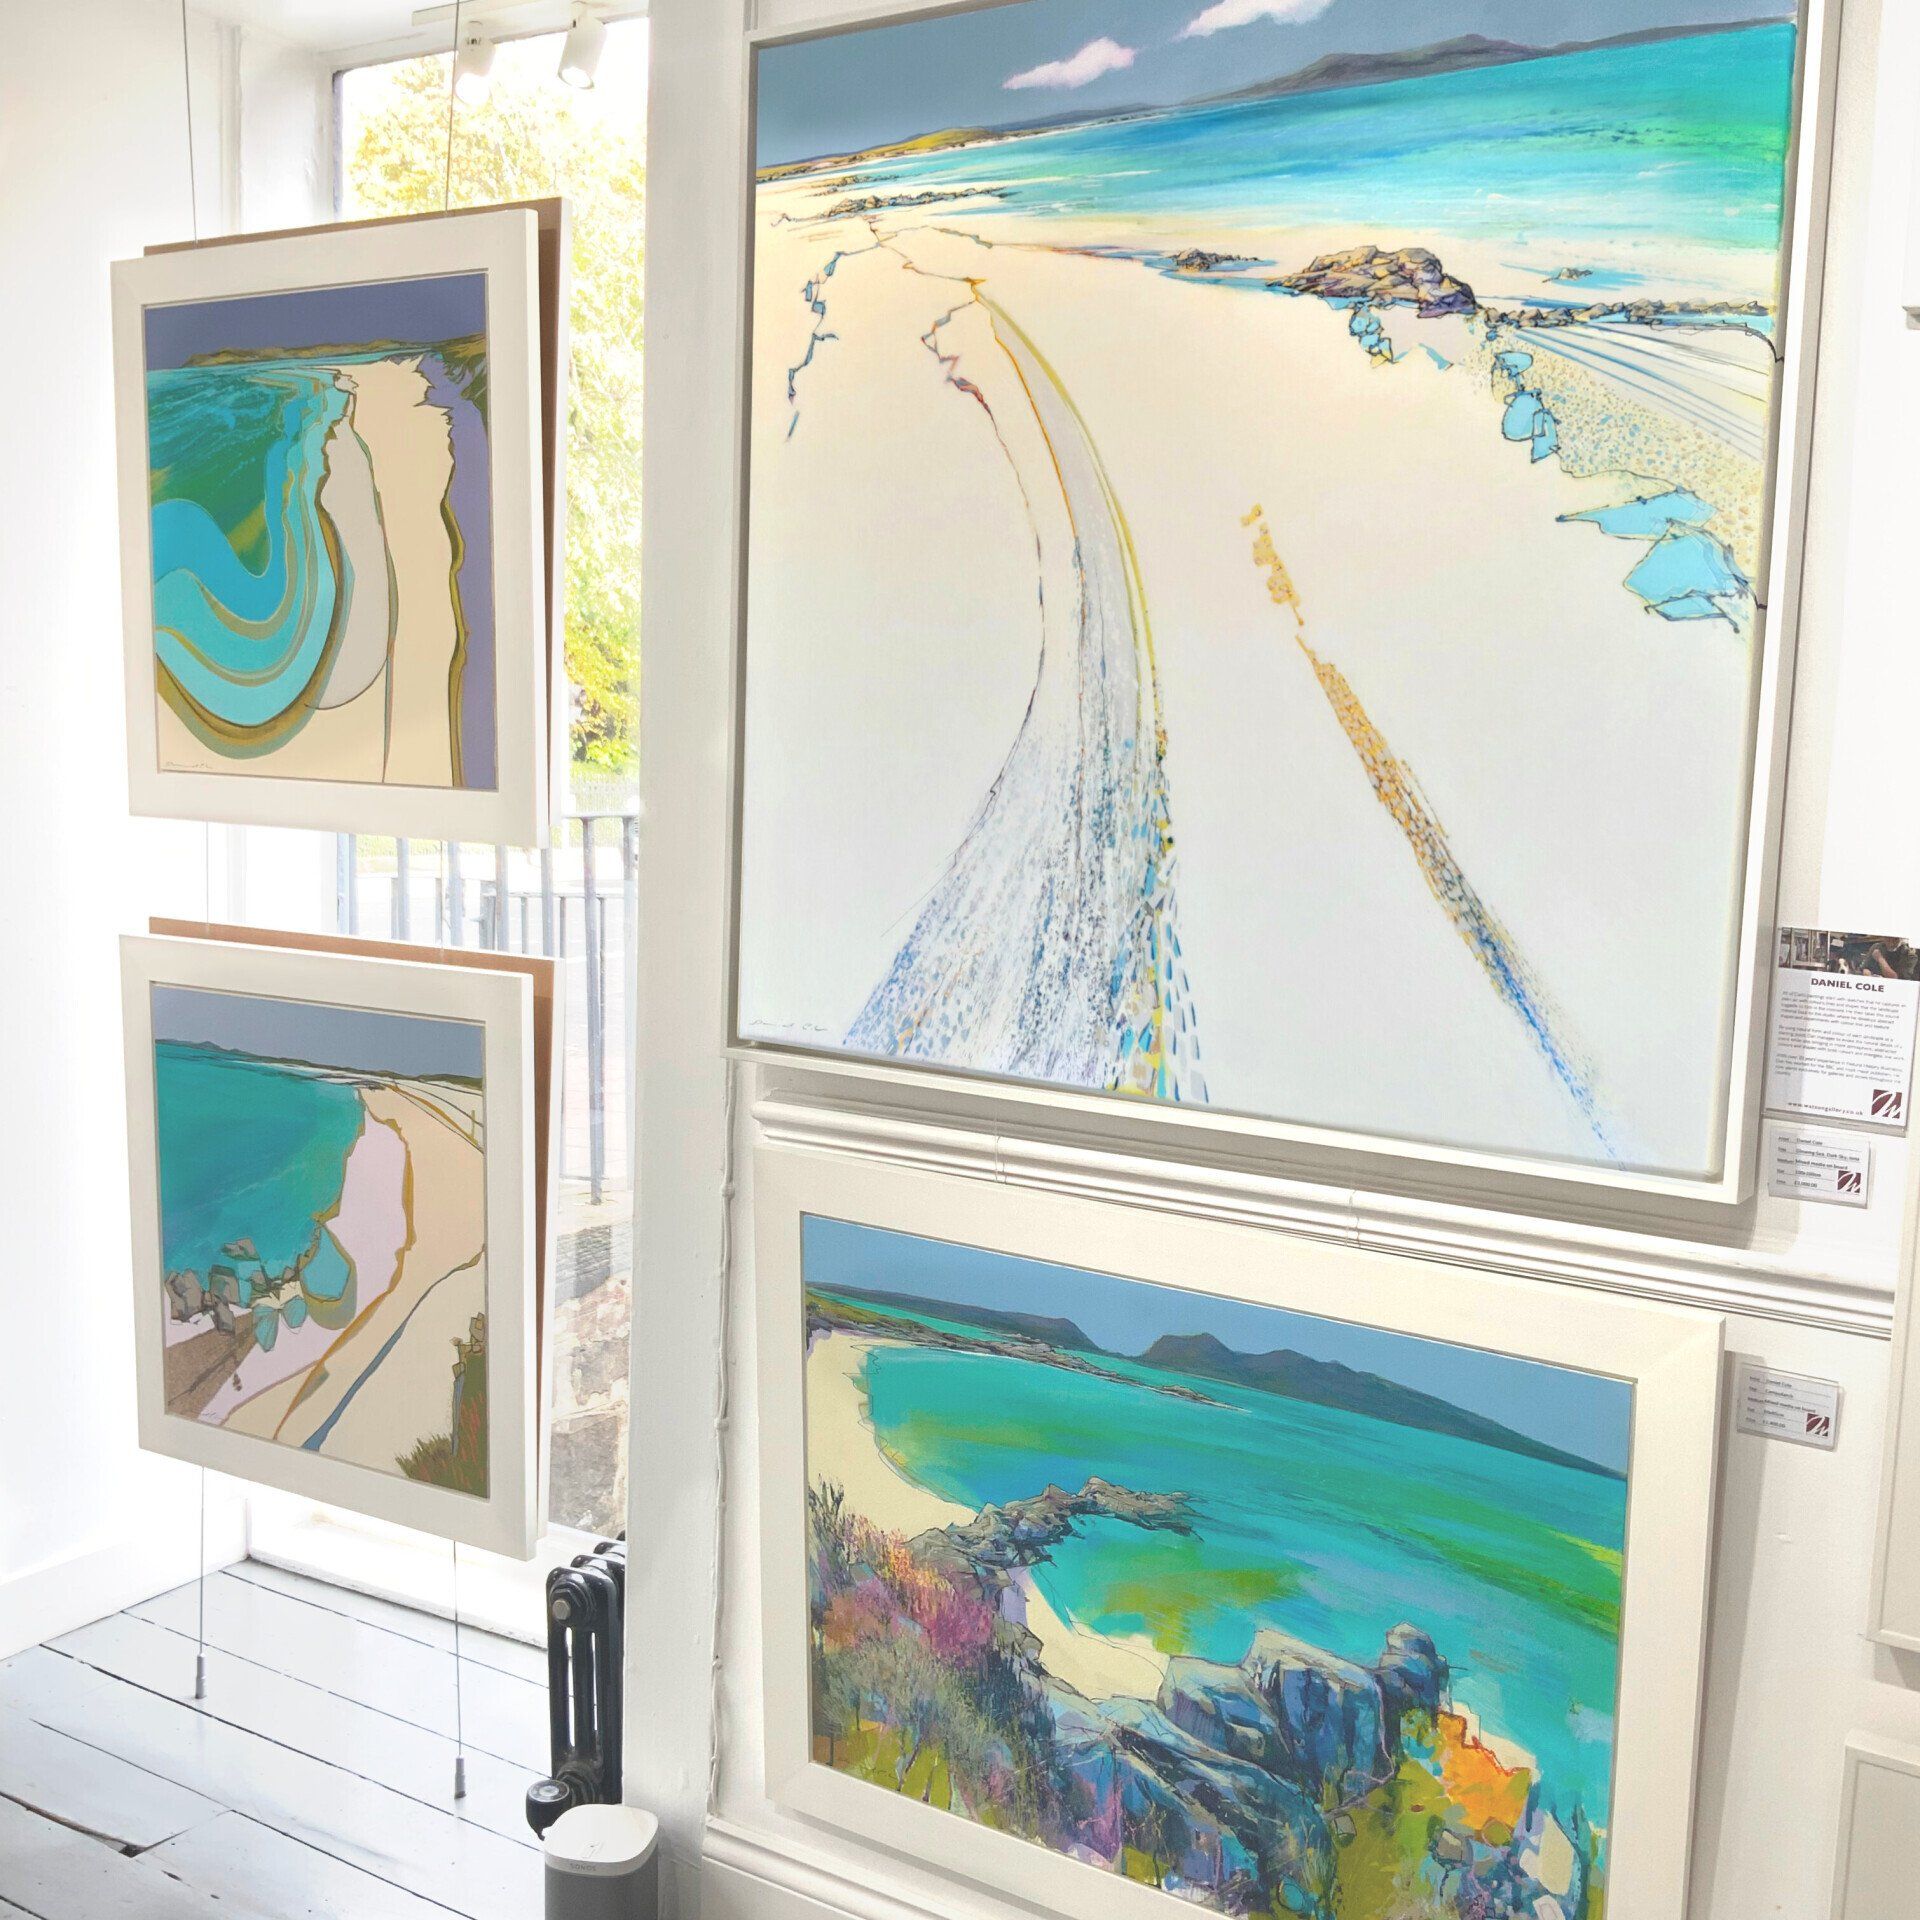 Coastal landscape paintings by Dan Cole available at Watson Gallery Edinburgh